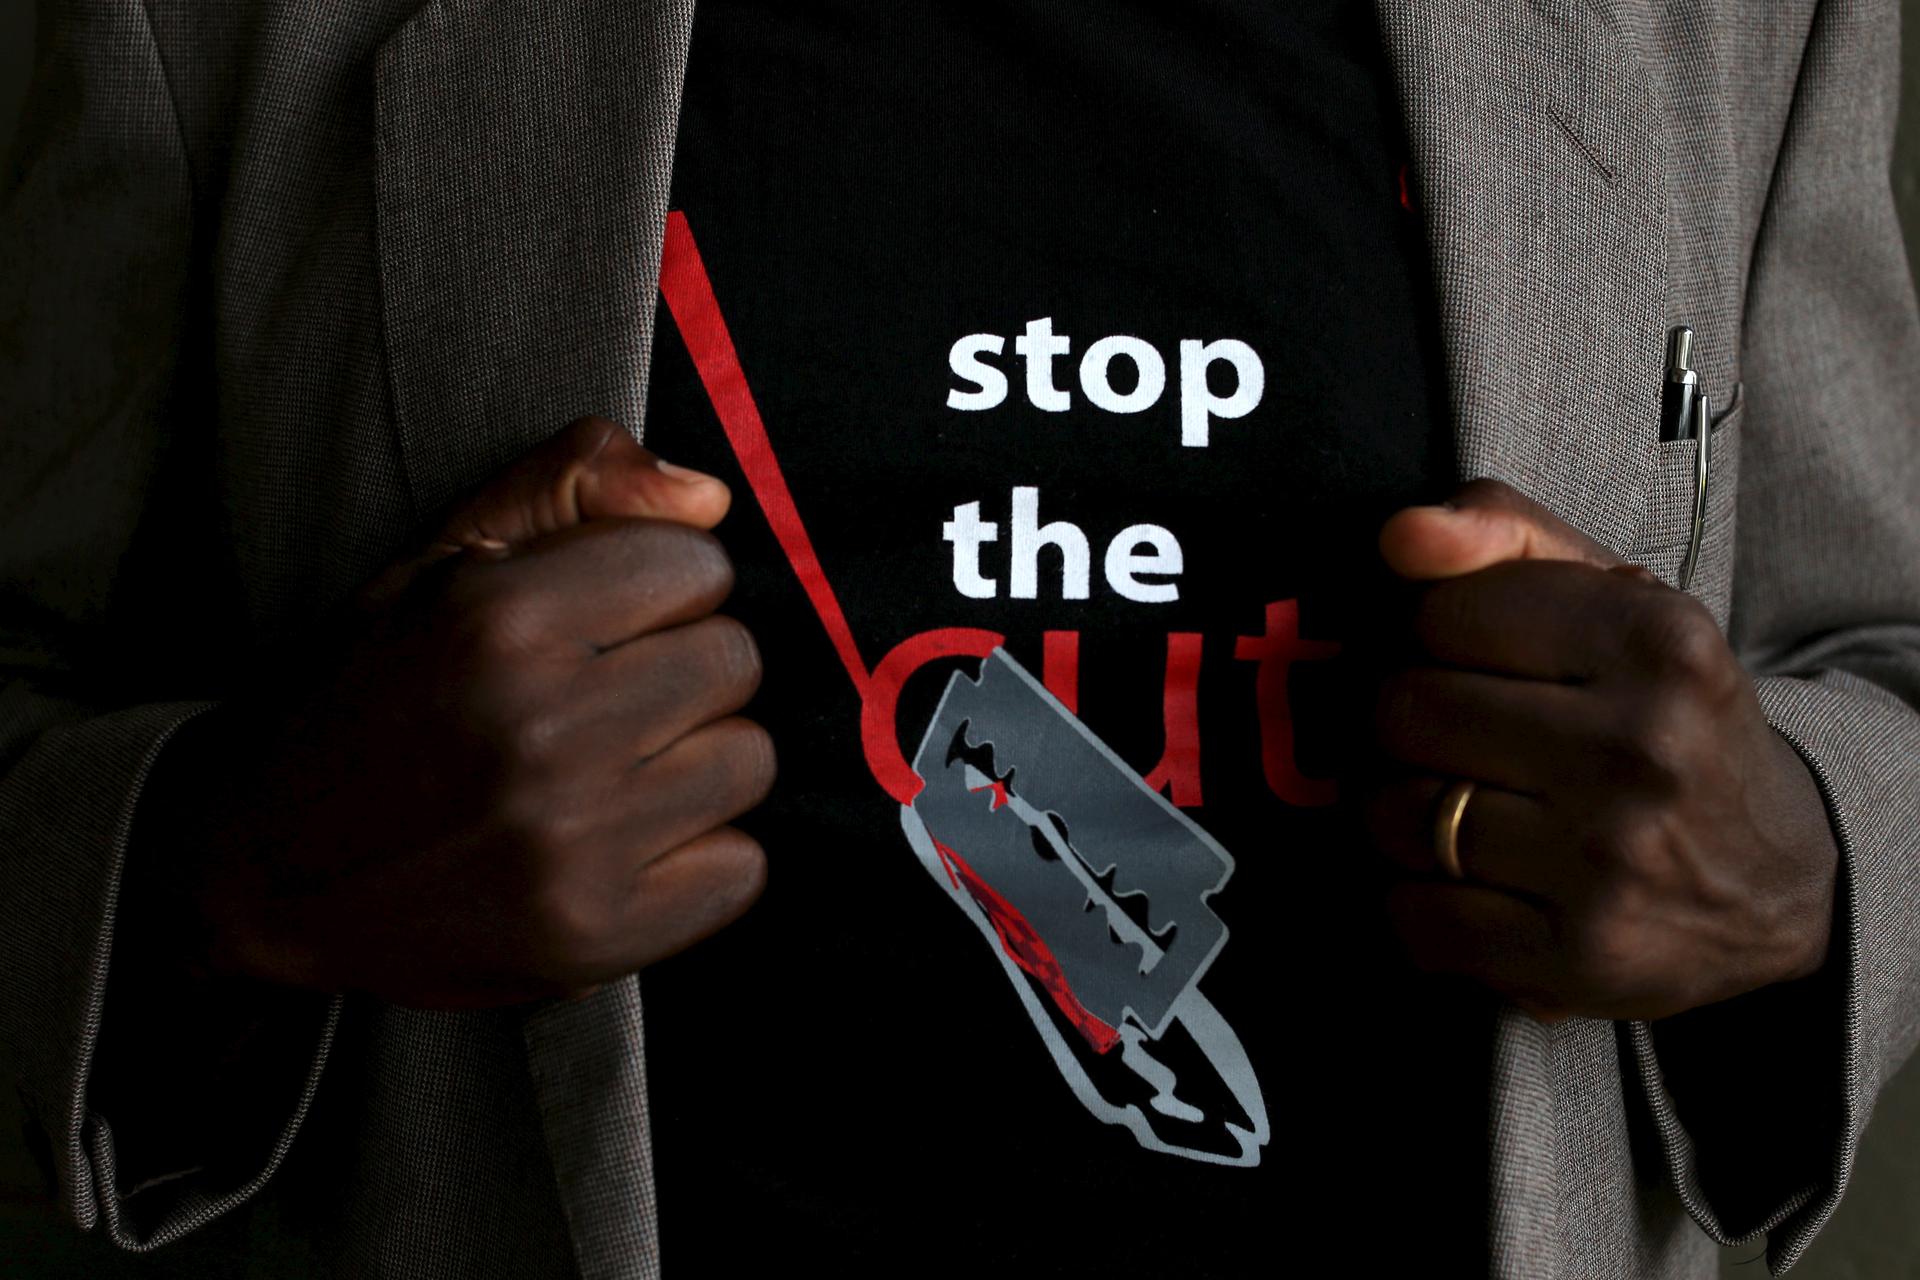 A man shows the logo of a T-shirt that reads "Stop the Cut" 